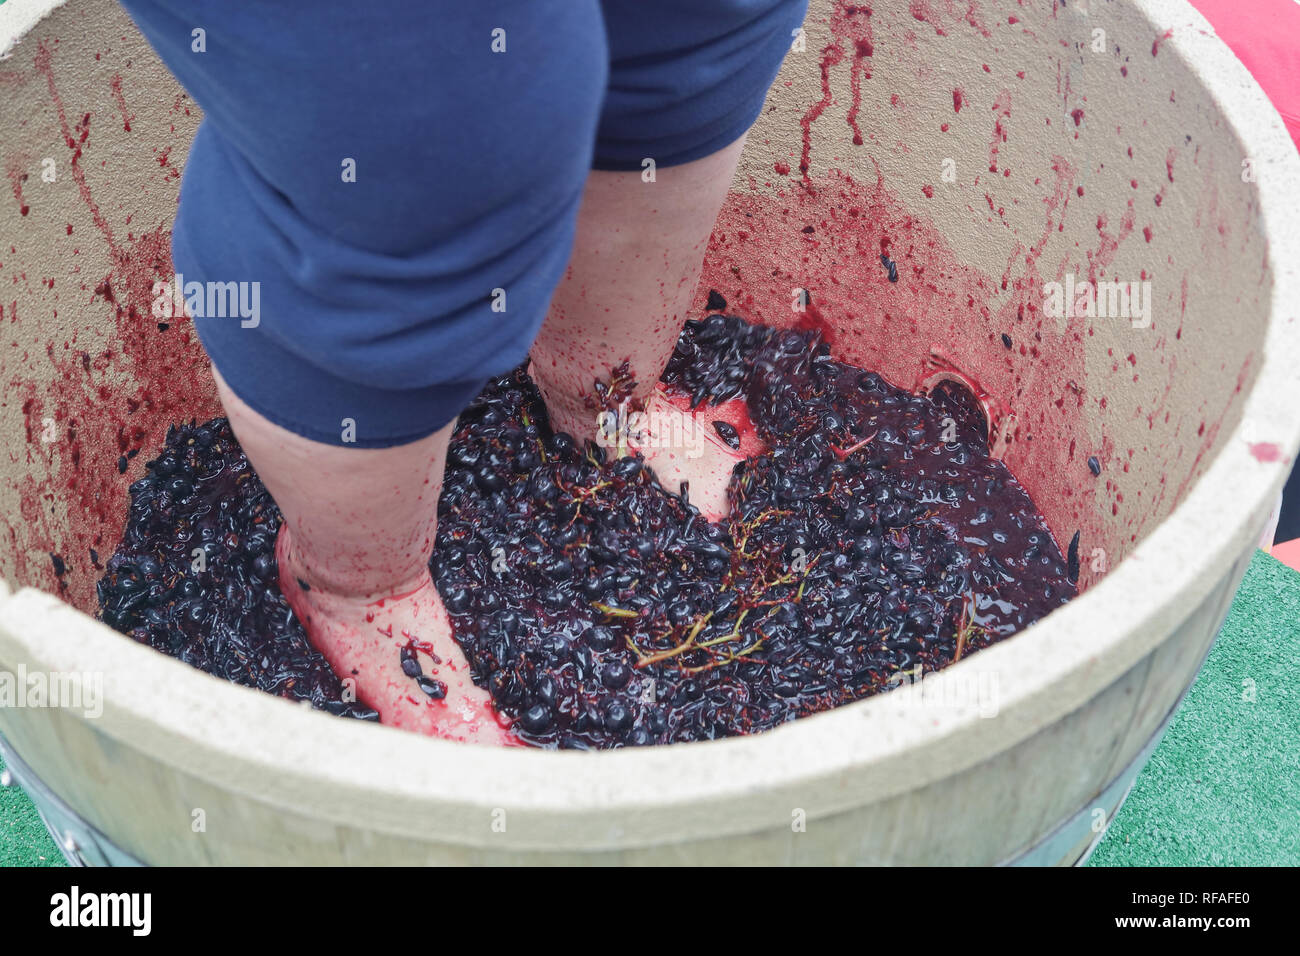 Feet and hand stomping grapes in competition Stock Photo